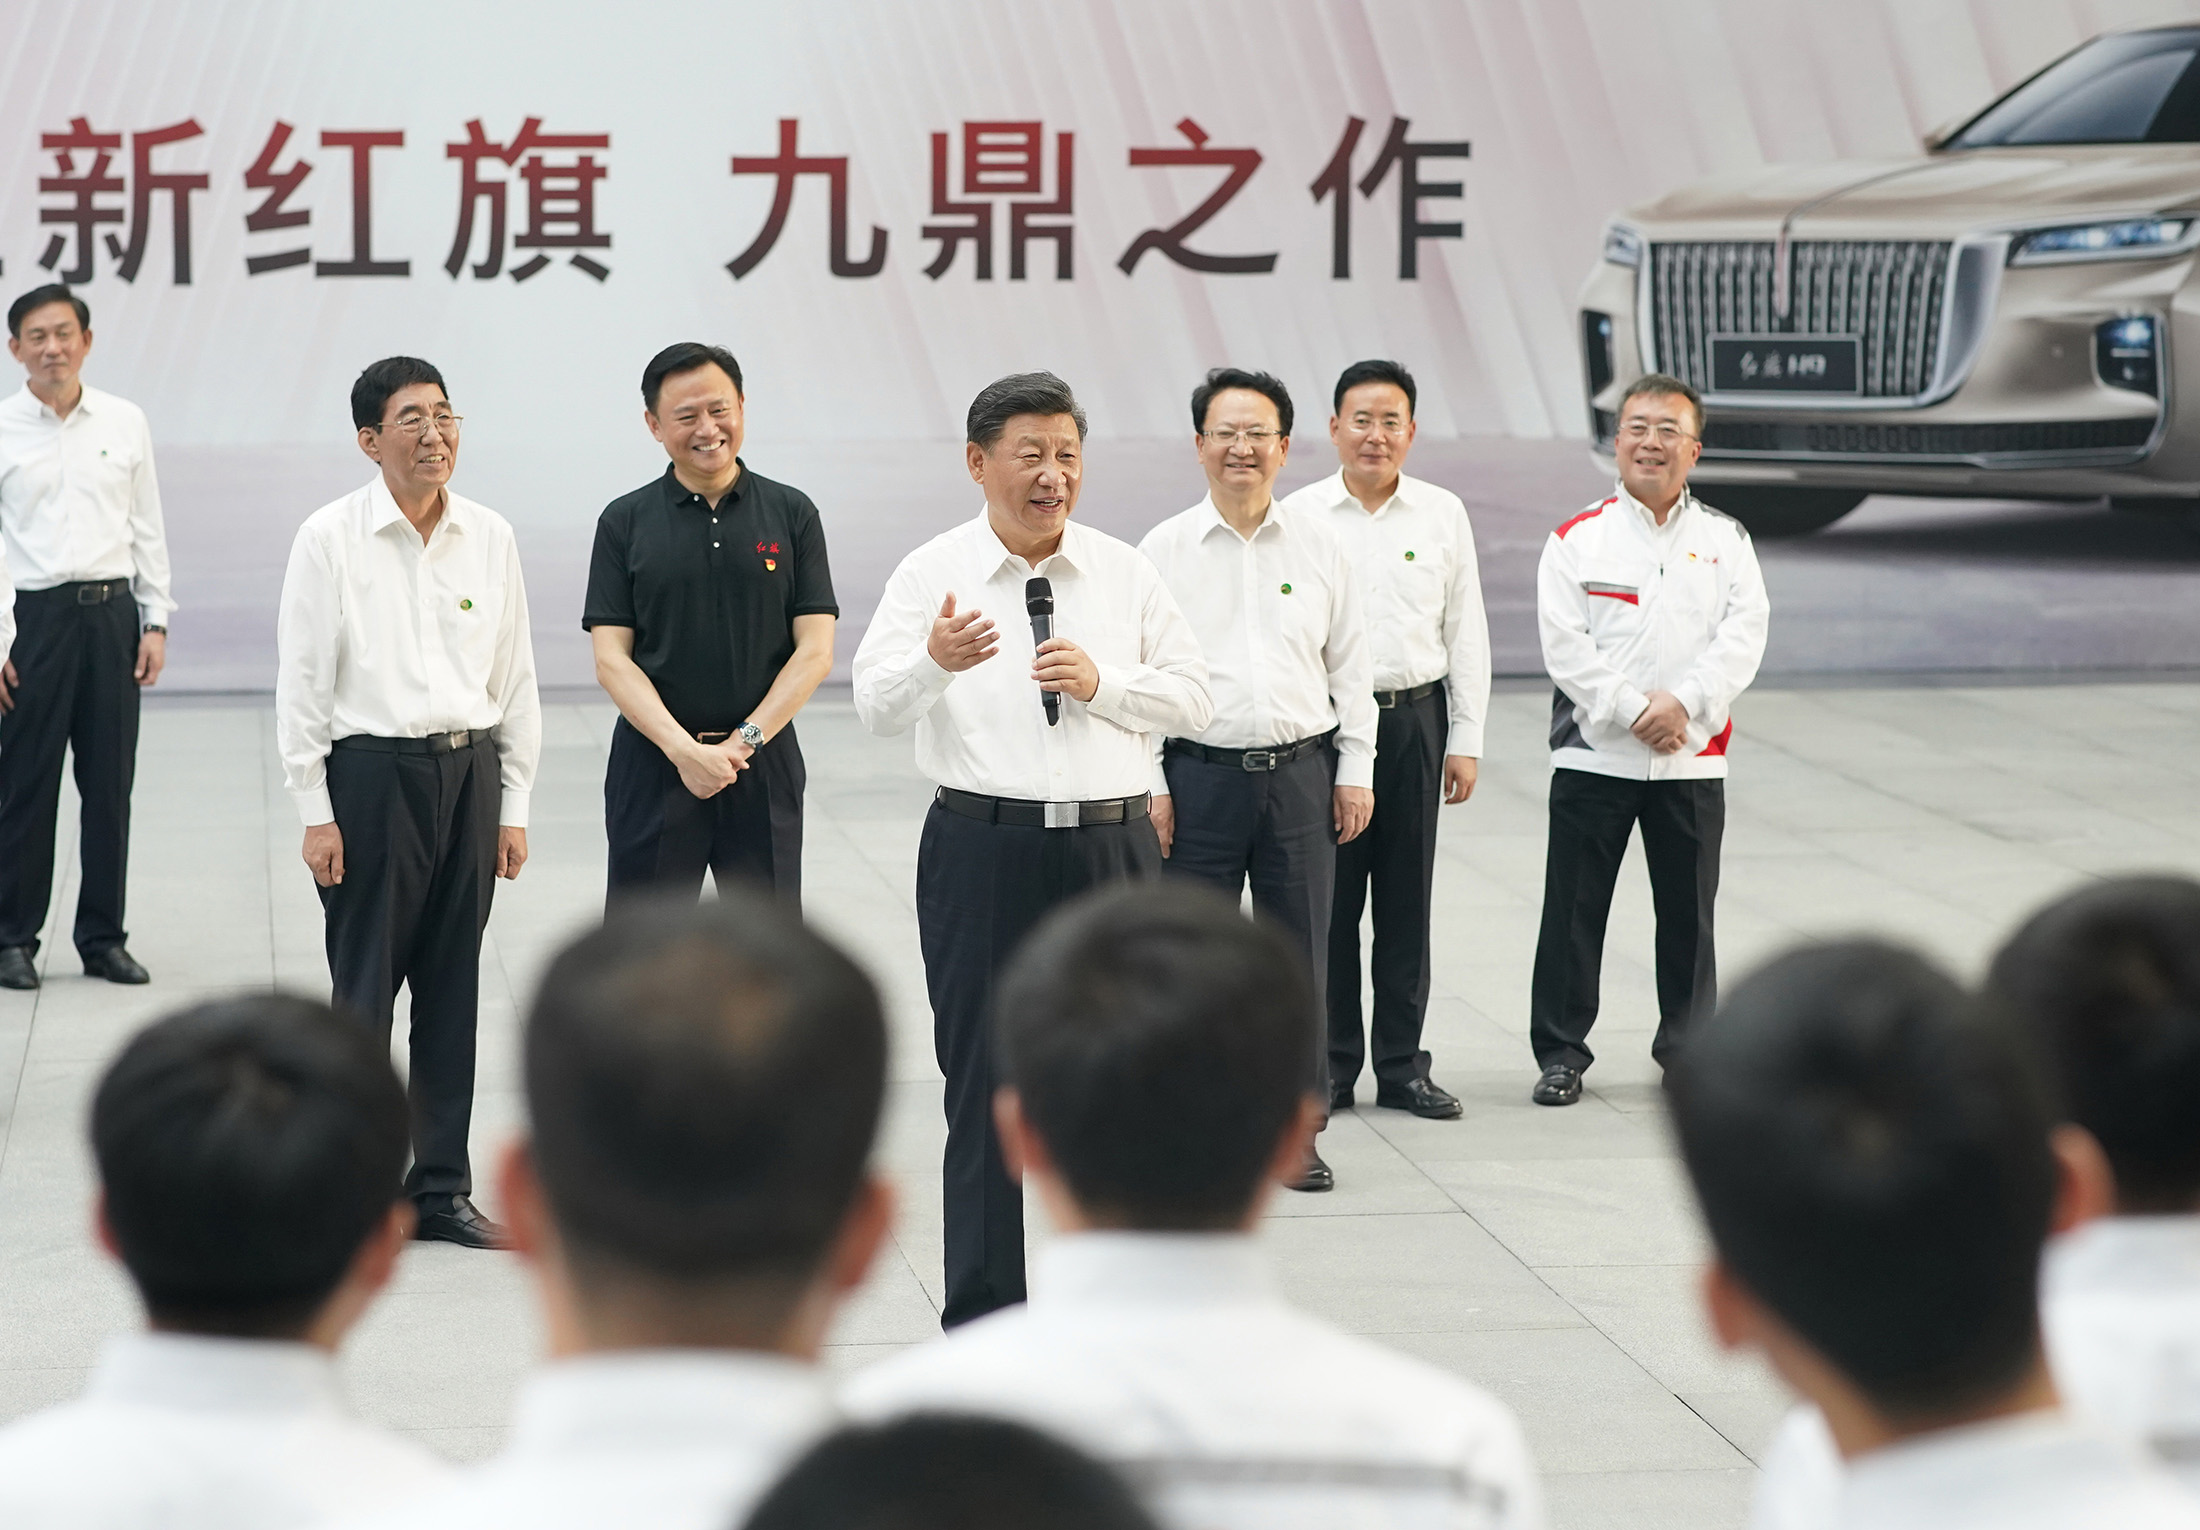 Xi Jinping, center, at the R&D headquarters of FAW Group in Changchun on July 23.